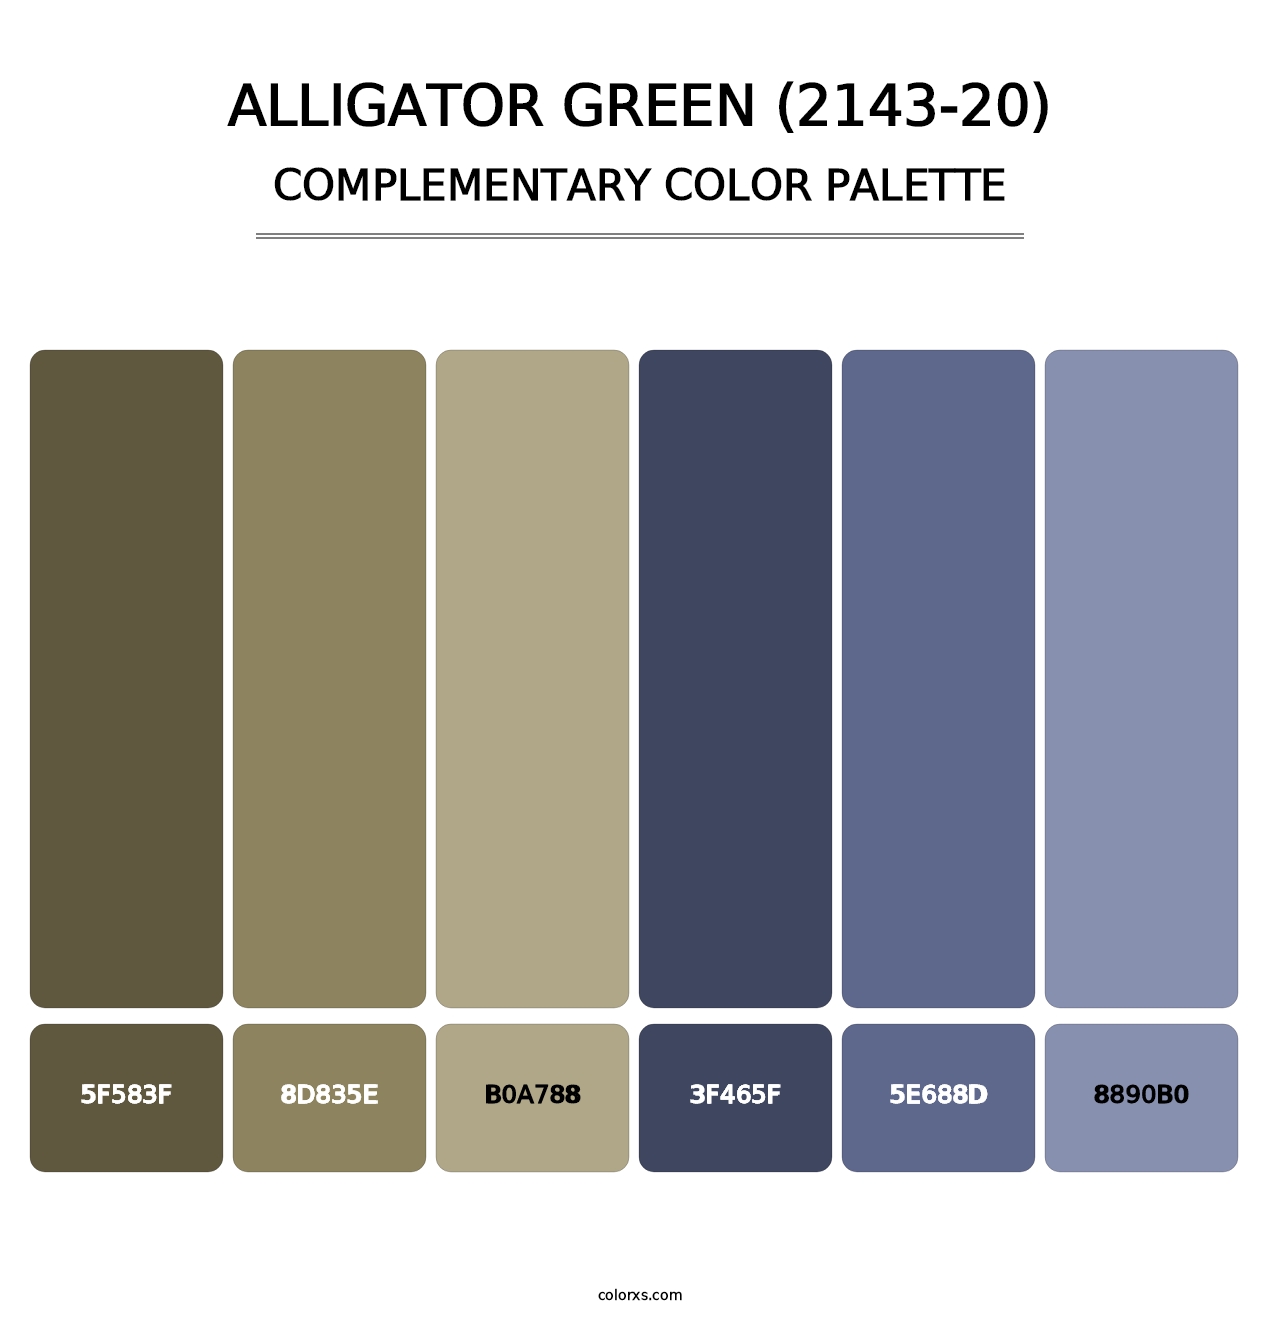 Alligator Green (2143-20) - Complementary Color Palette